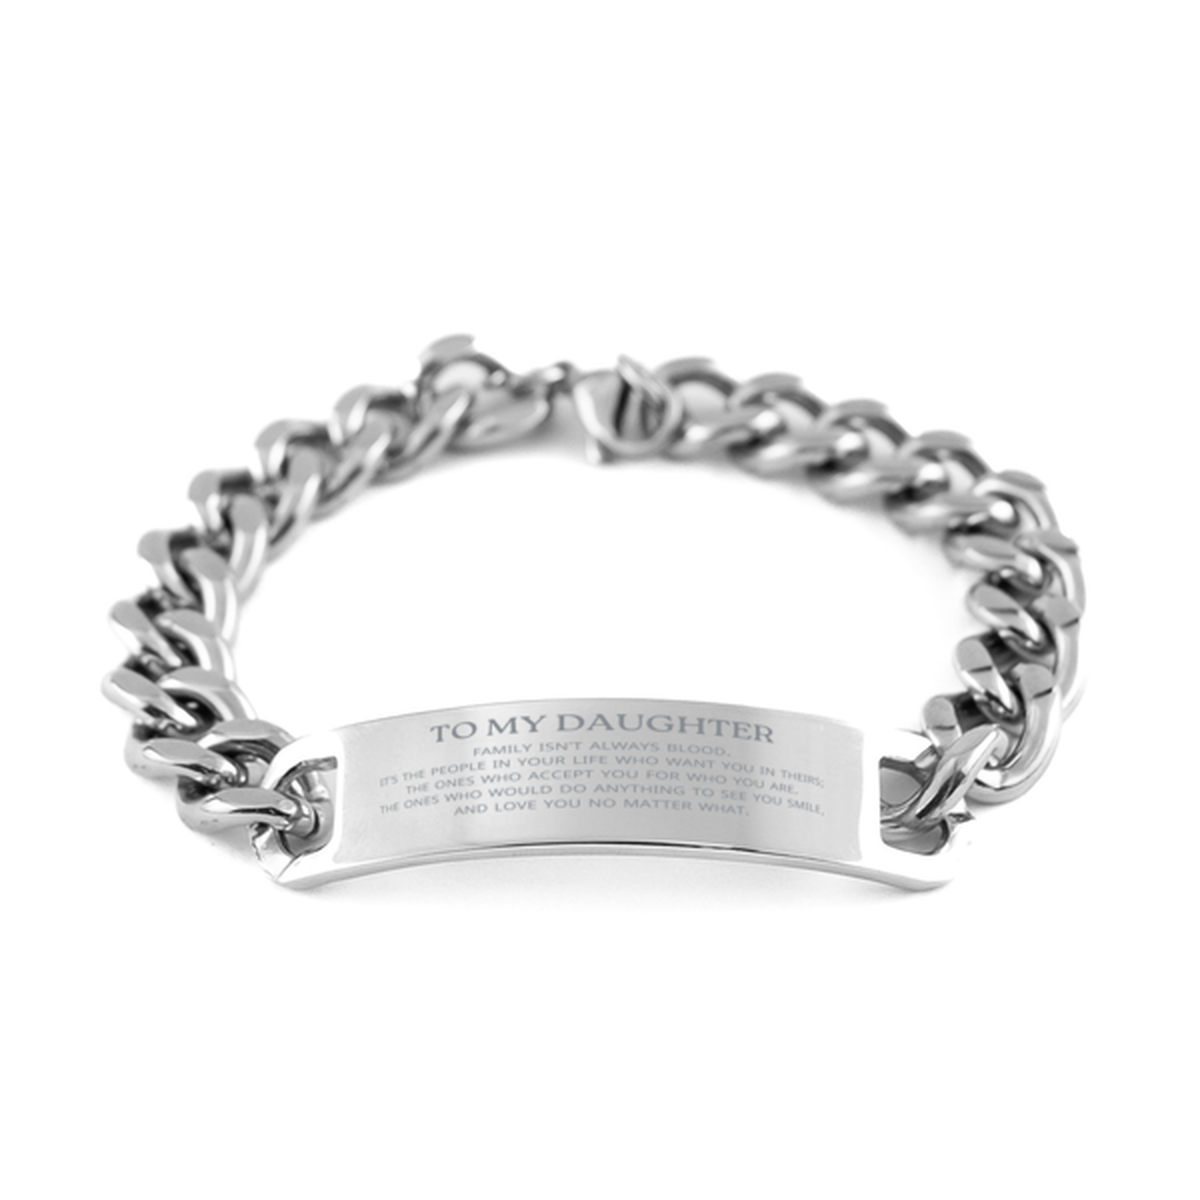 To My Daughter Gifts, Family isn't always blood, Daughter Cuban Chain Stainless Steel Bracelet, Birthday Christmas Unique Present For Daughter